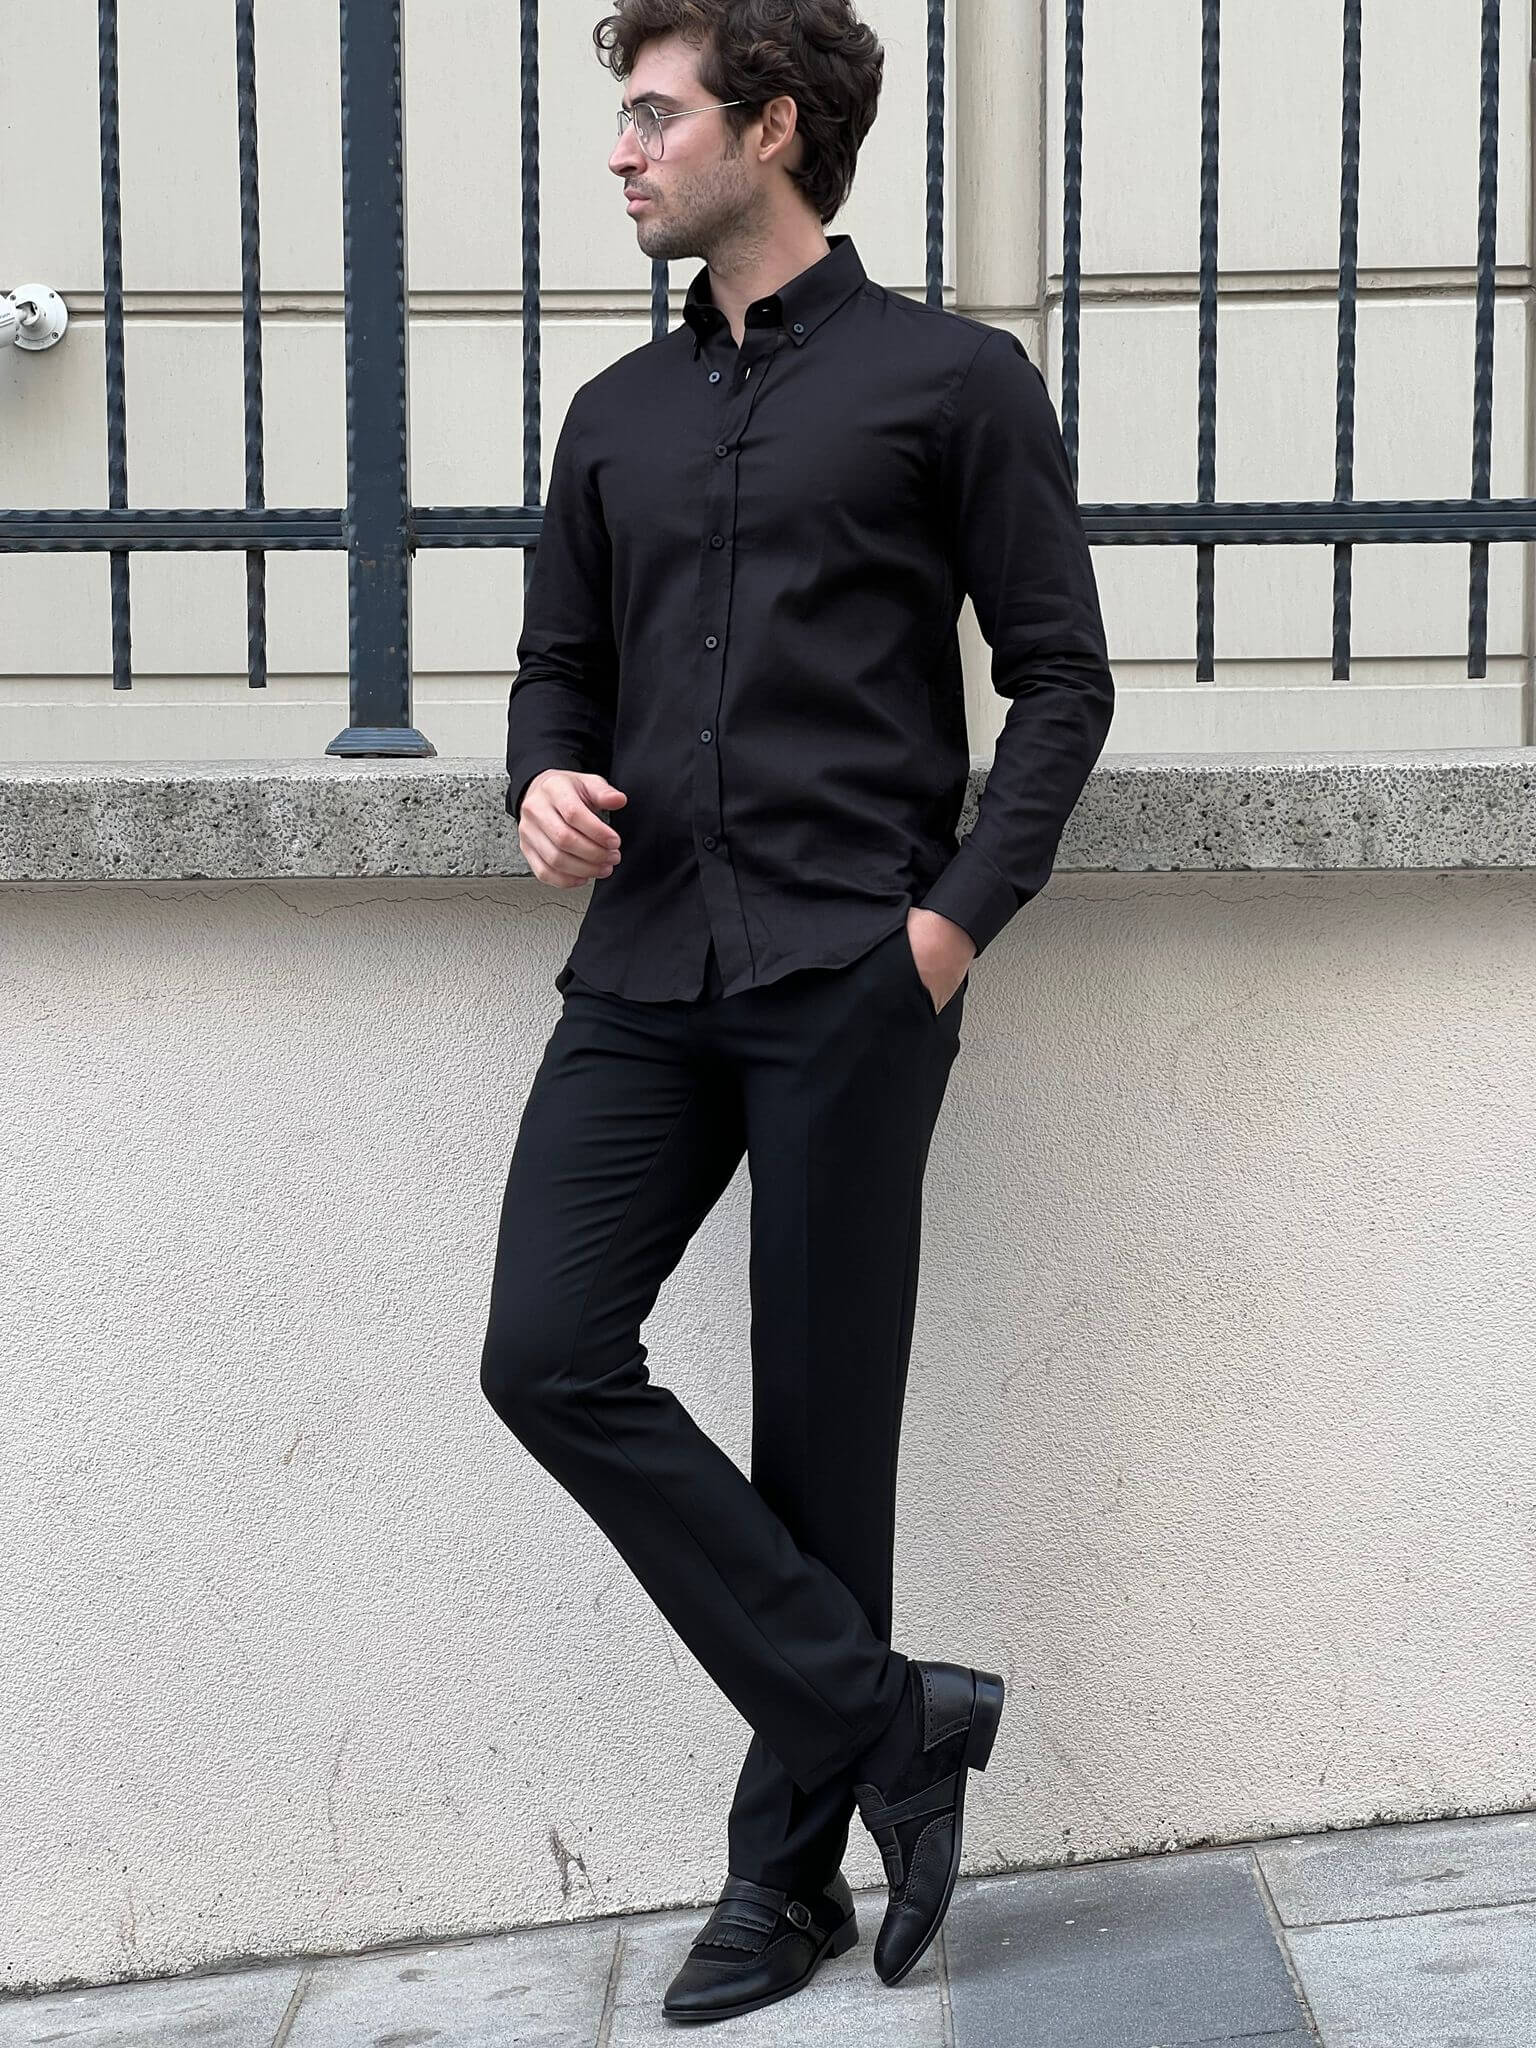 Captivating image of a male model in a black cotton shirt, highlighting comfort and elegance.